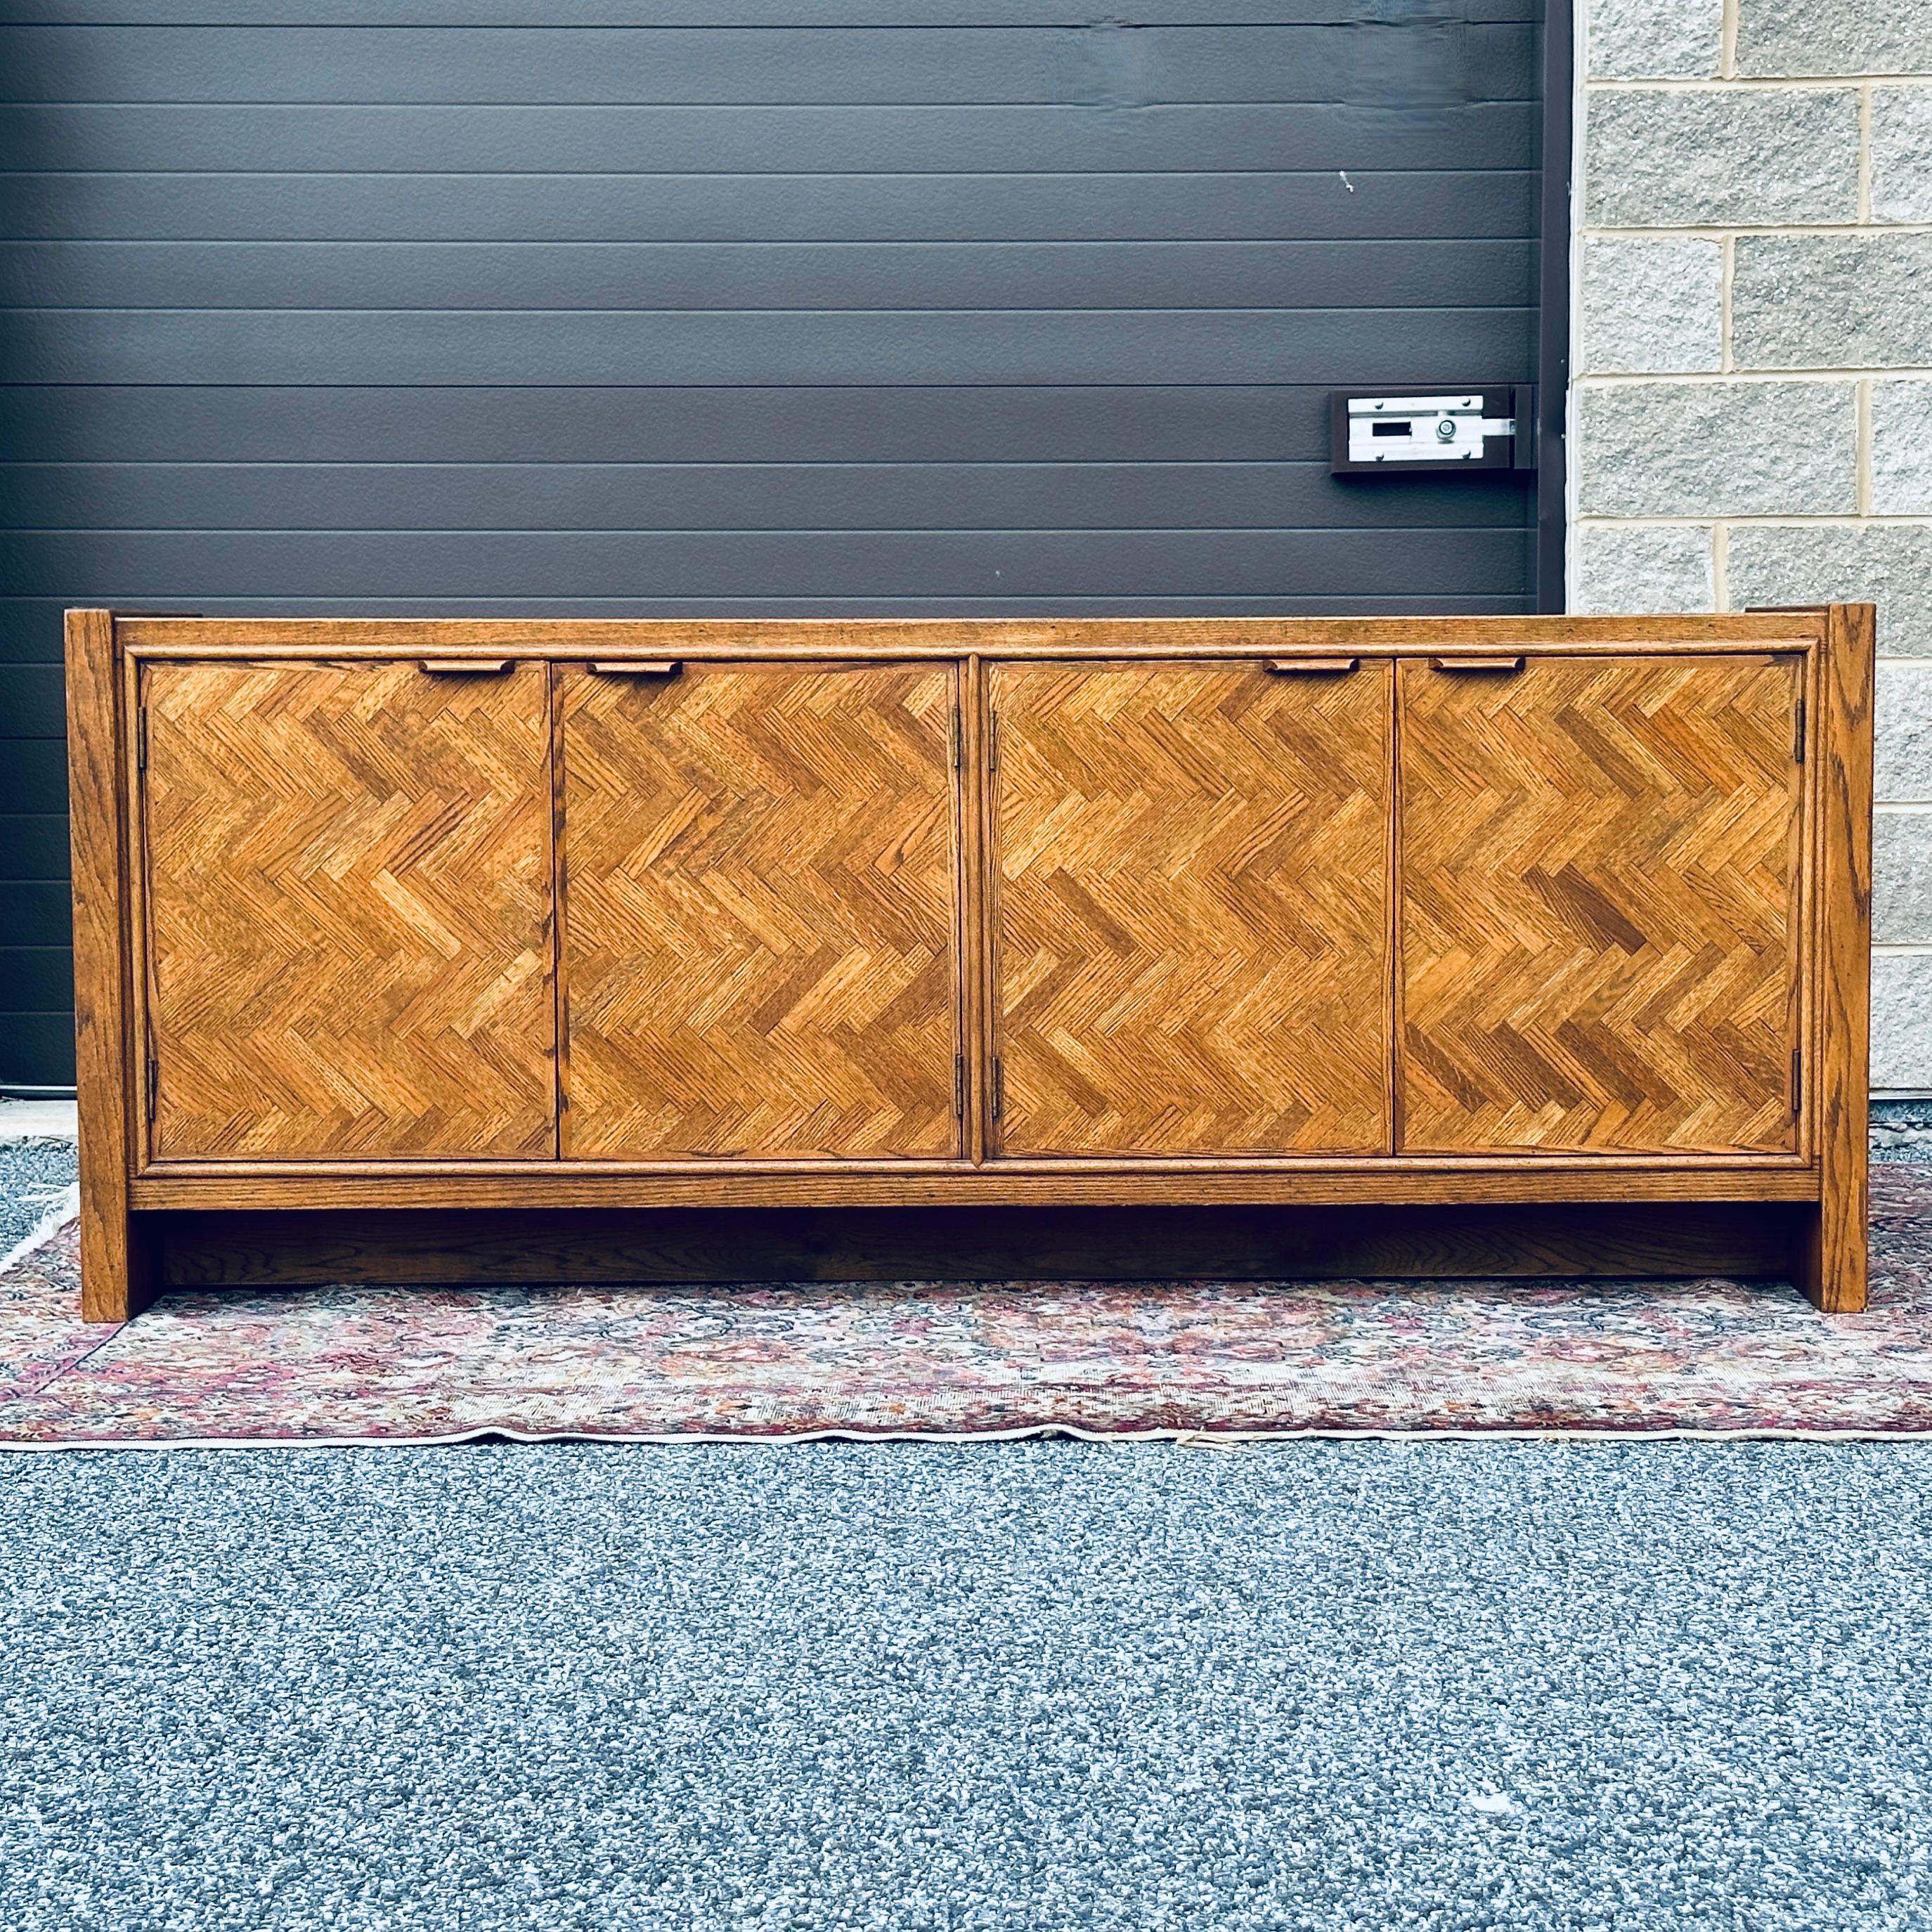 Century Furniture four door credenza with parquet door fronts. The left doors contain three pocket drawers while the right doors have cabinet space with a shelf.